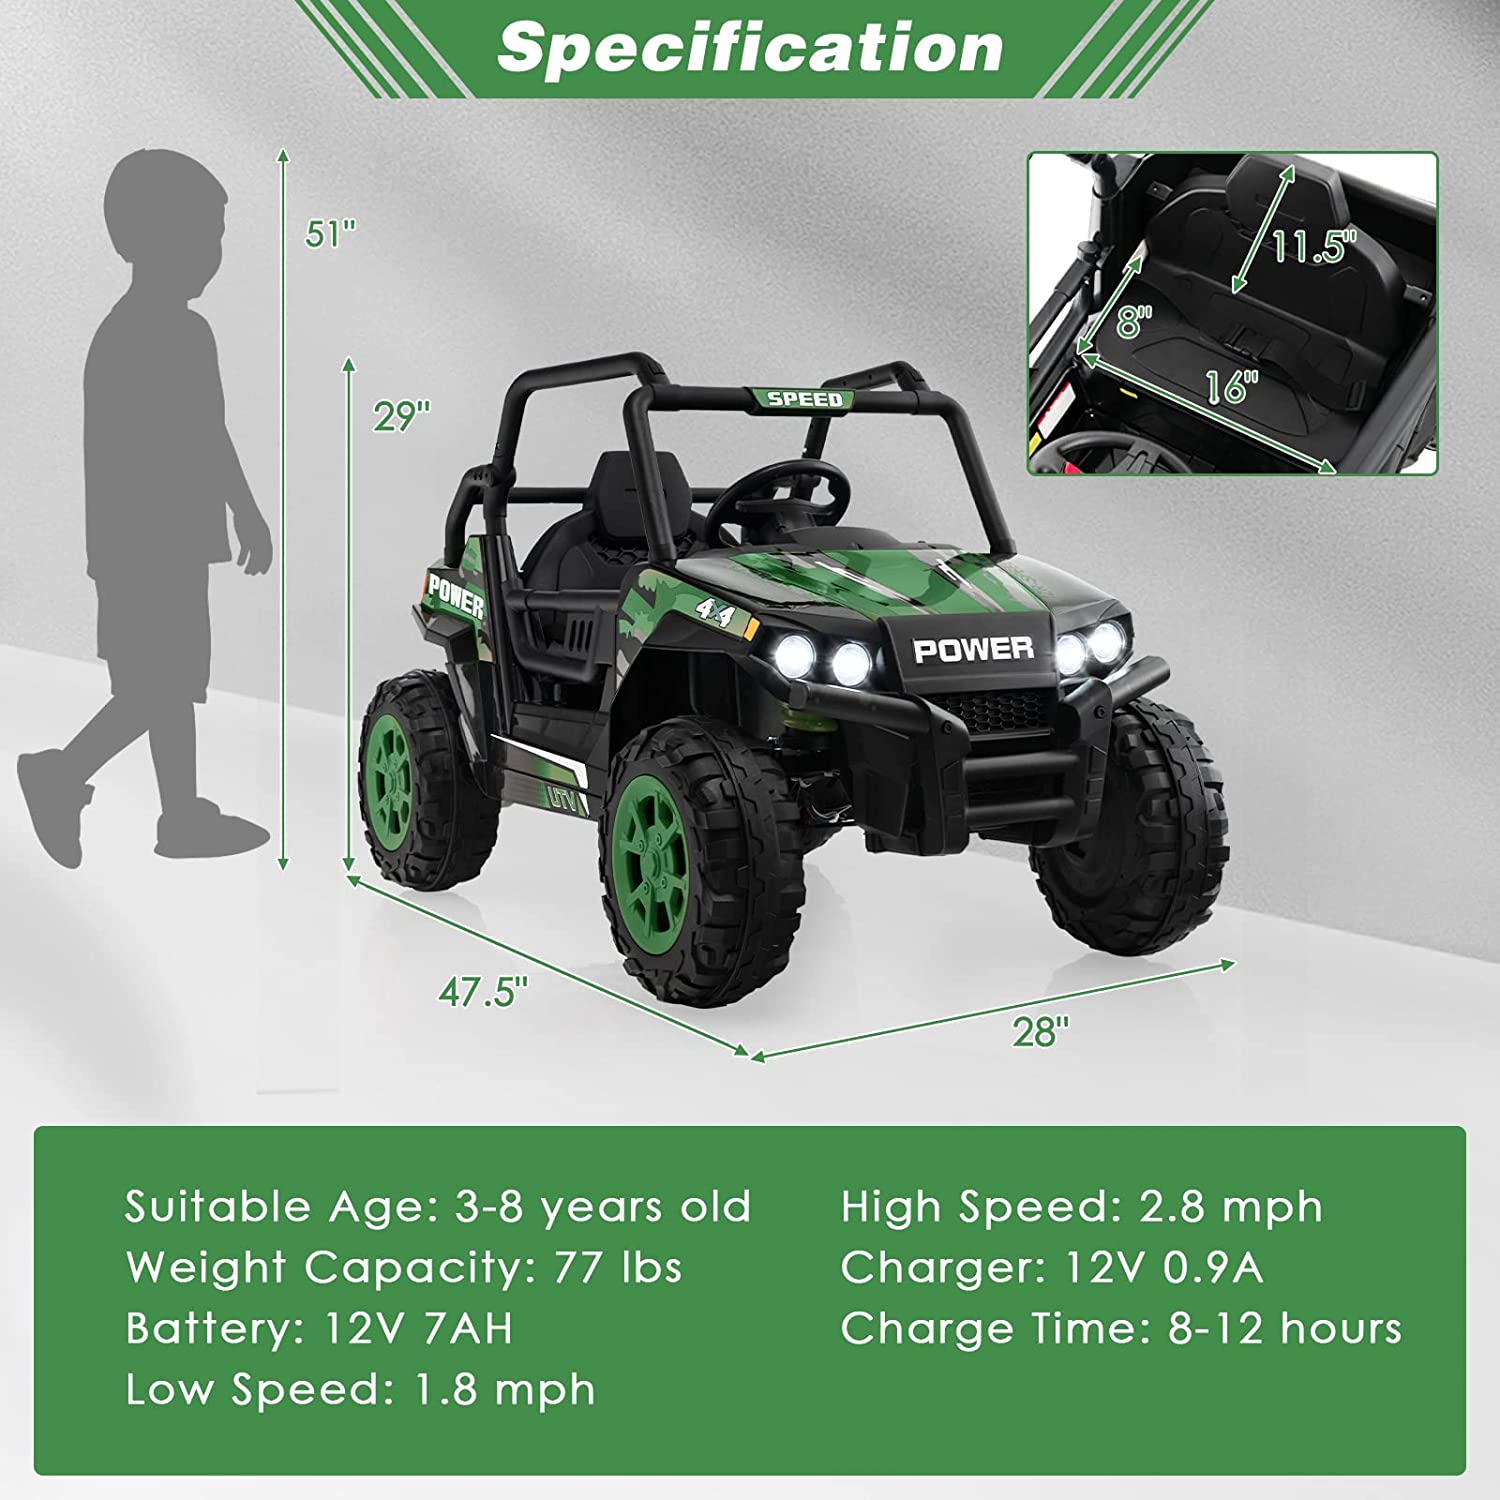 Chairliving 12V Kids Ride On UTV Car Battery Powered Off-Road Buggy Truck with Remote Control USB Port for Boys Girls